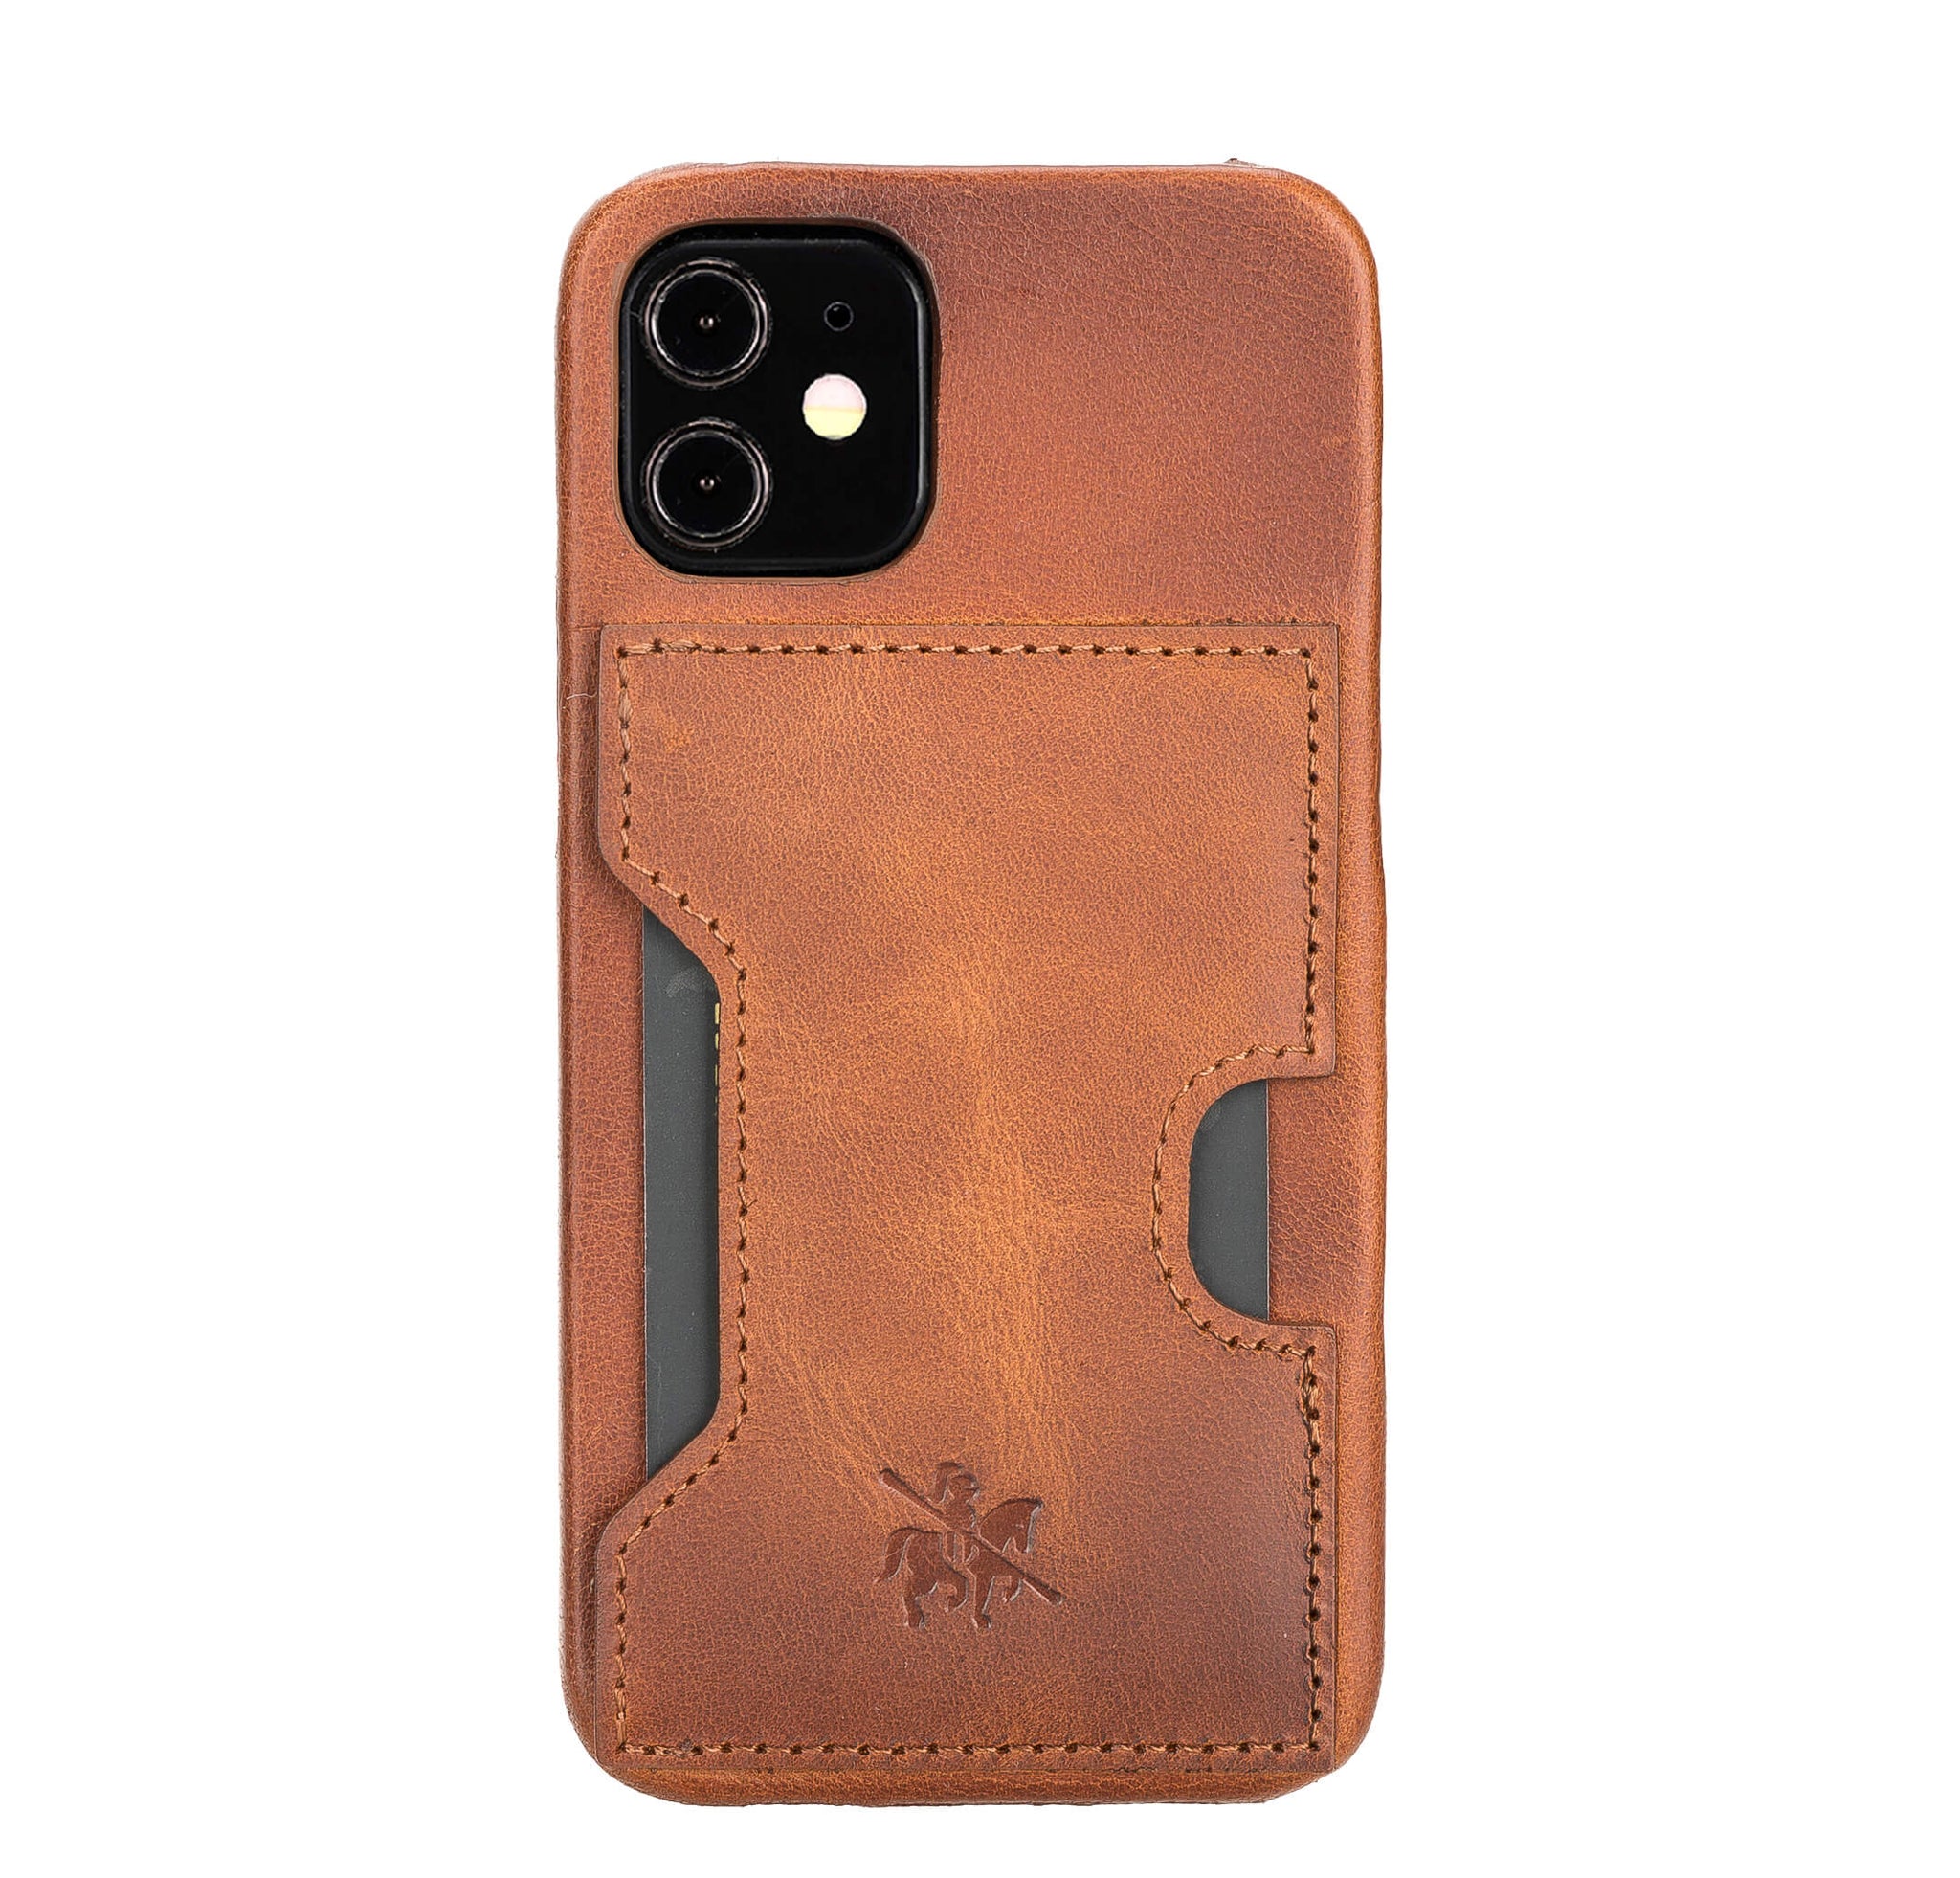 Florence Leather Wallet Case For Iphone 12 Mini Venito Leather